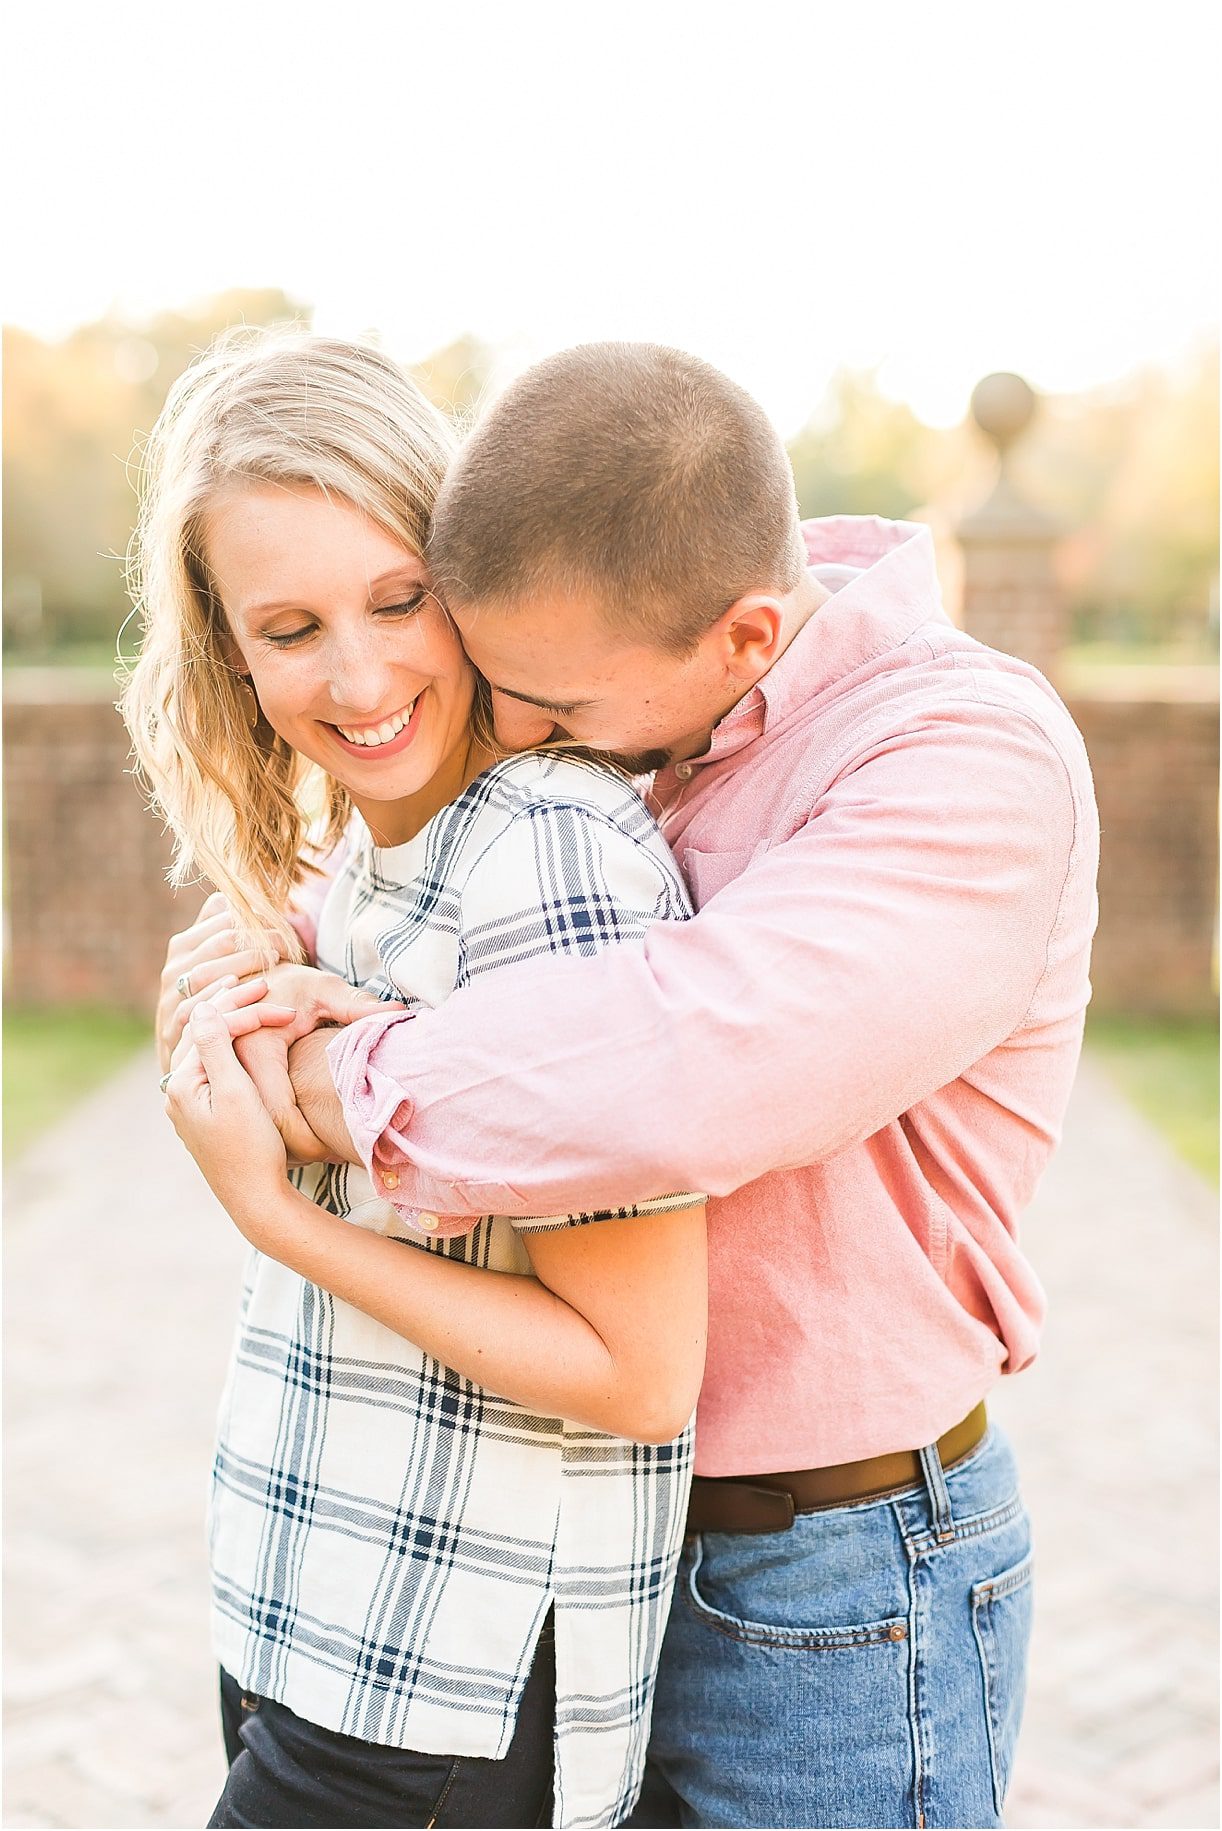 William and Mary Engagement Session | Hill City Bride Virginia Wedding Blog